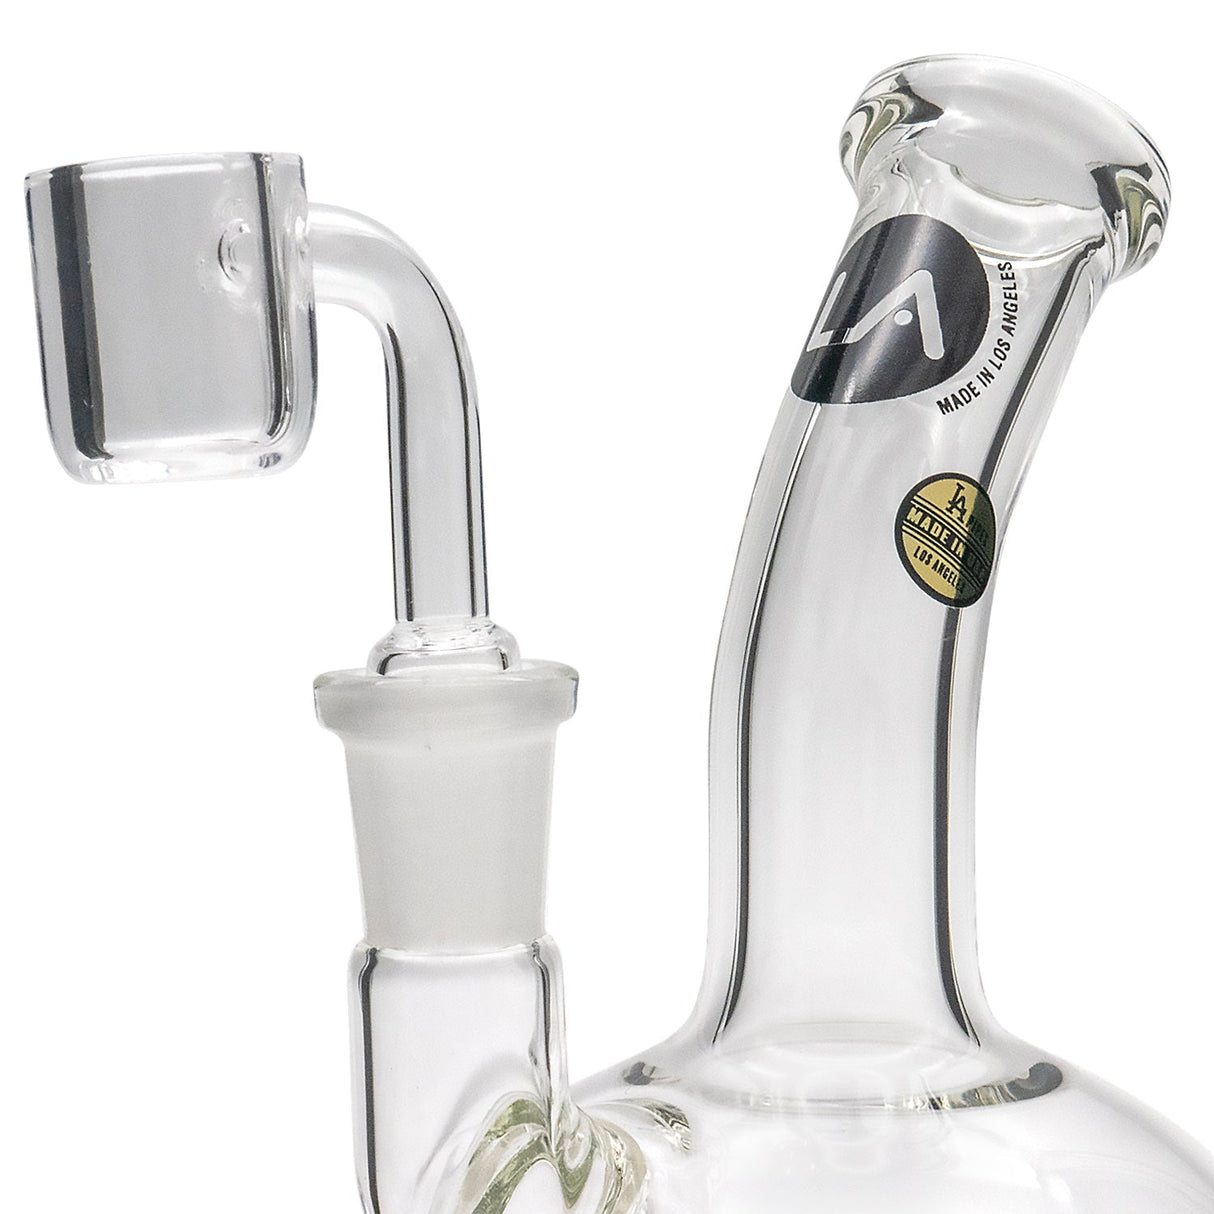 LA Pipes Bubble Base Concentrate Rig with Banger Hanger - Close-up Side View